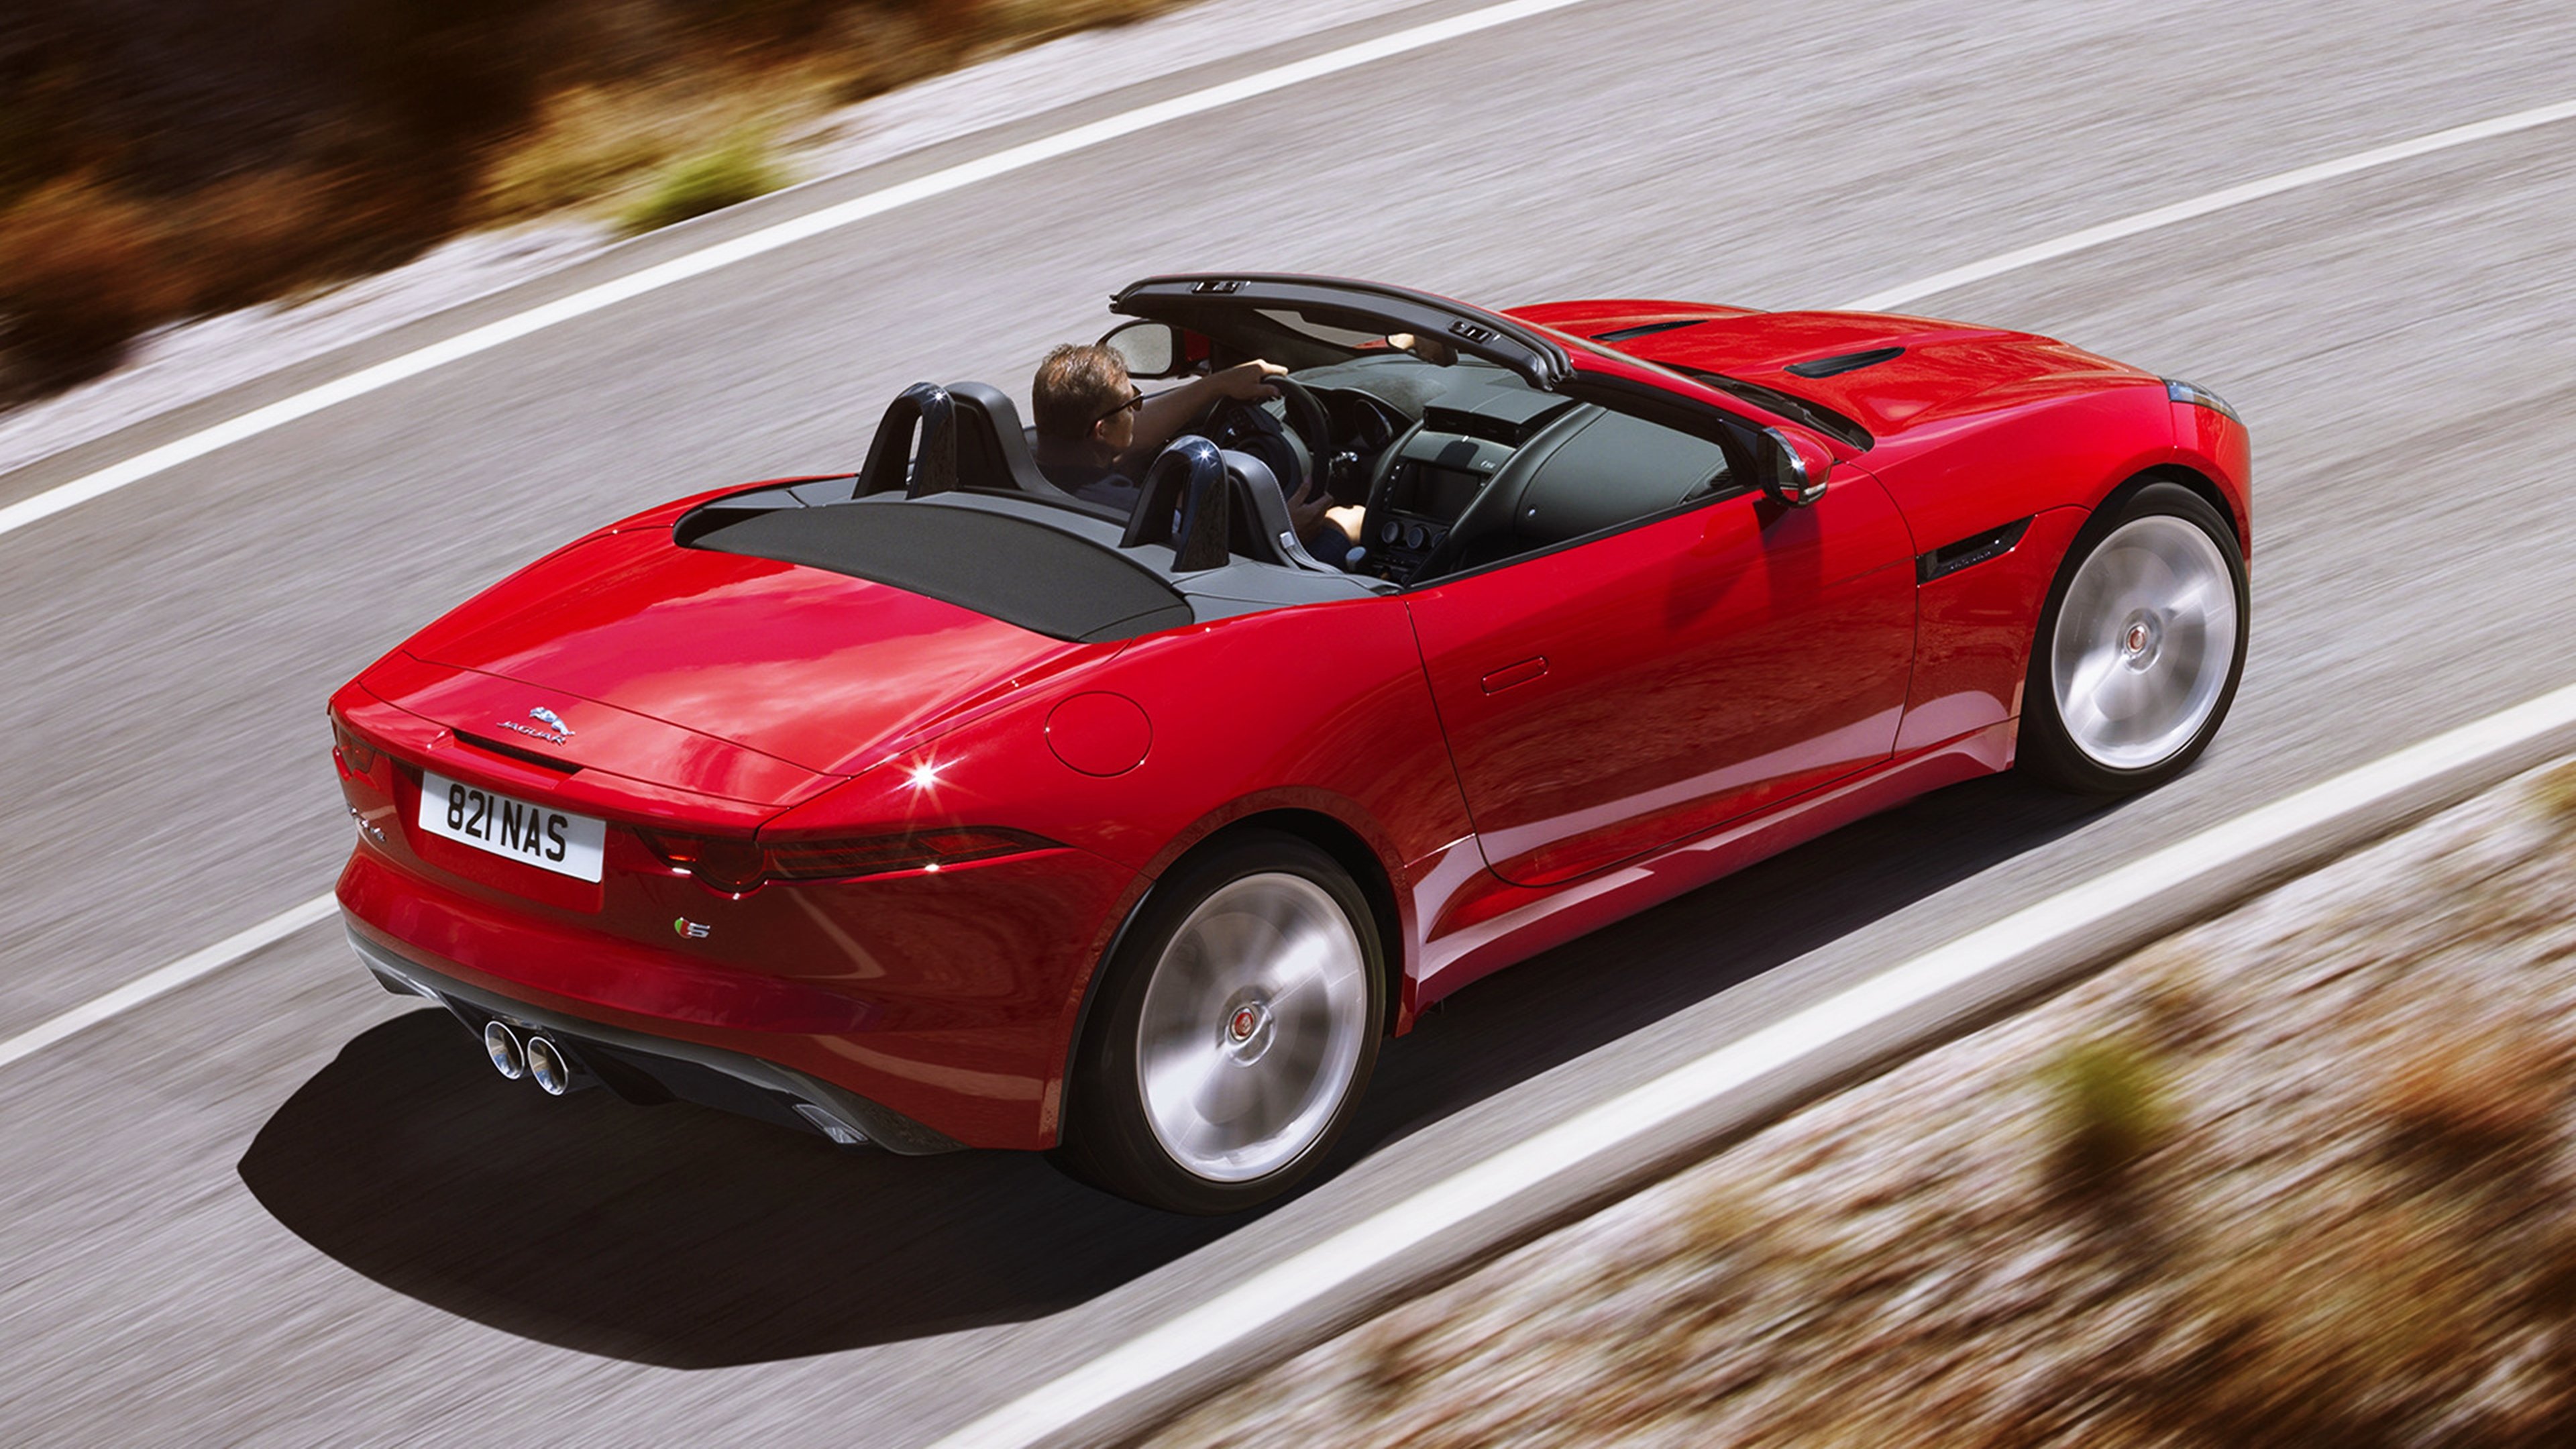 2015, Jaguar, F type, S, Red, Cars, Roof, Supercars, Road, Speed, Motors, Landscapes, Earth, Life, Luxury, New Wallpaper